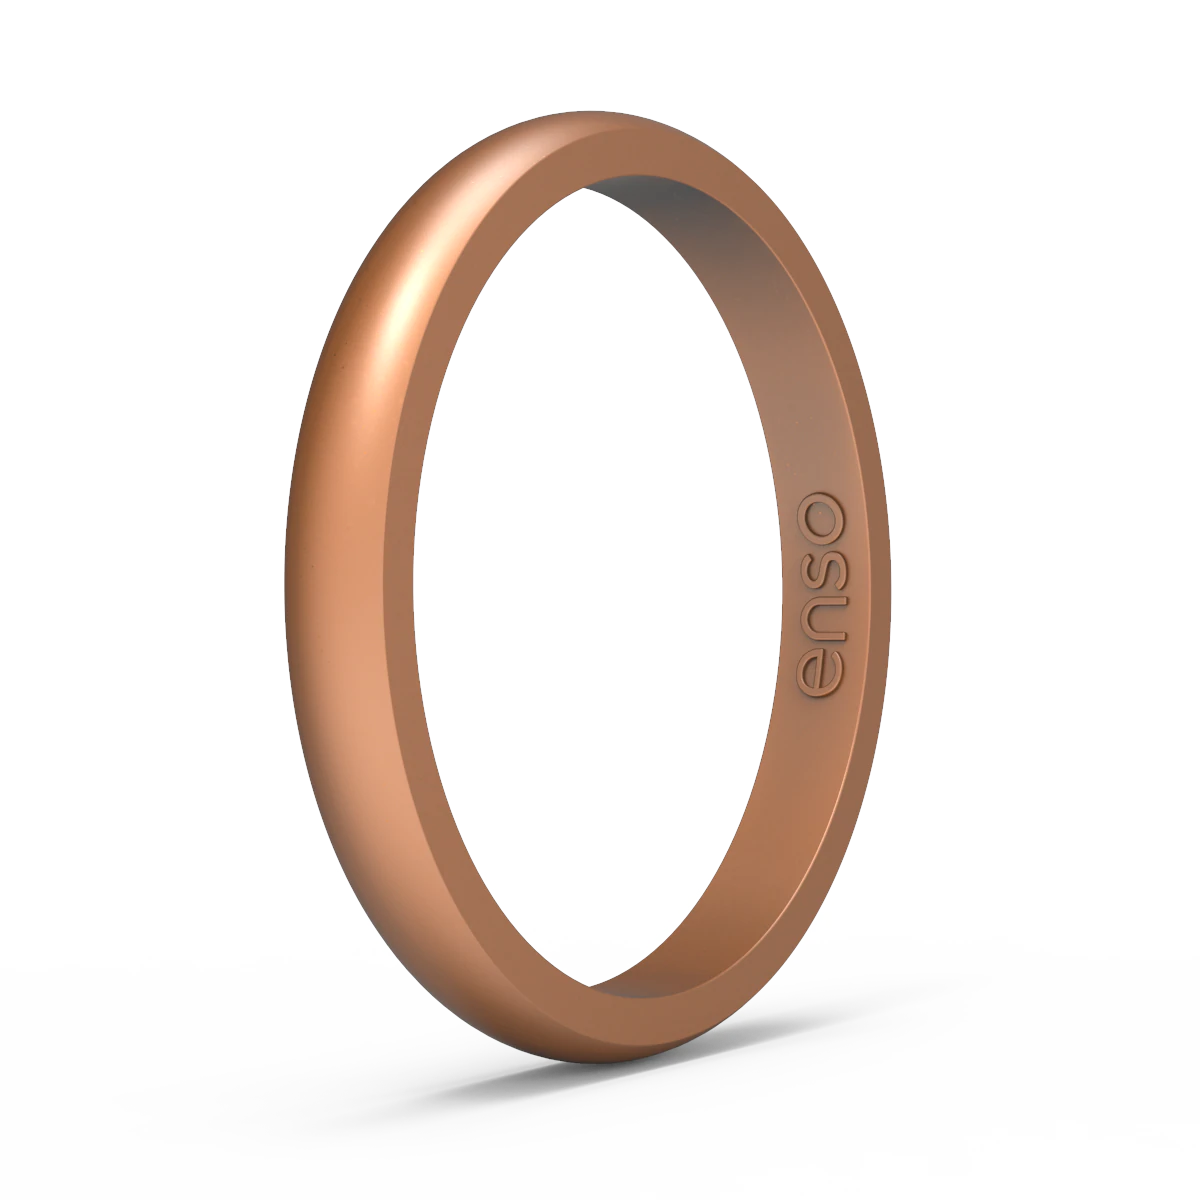 Enso Elements Thin Silicone Rings